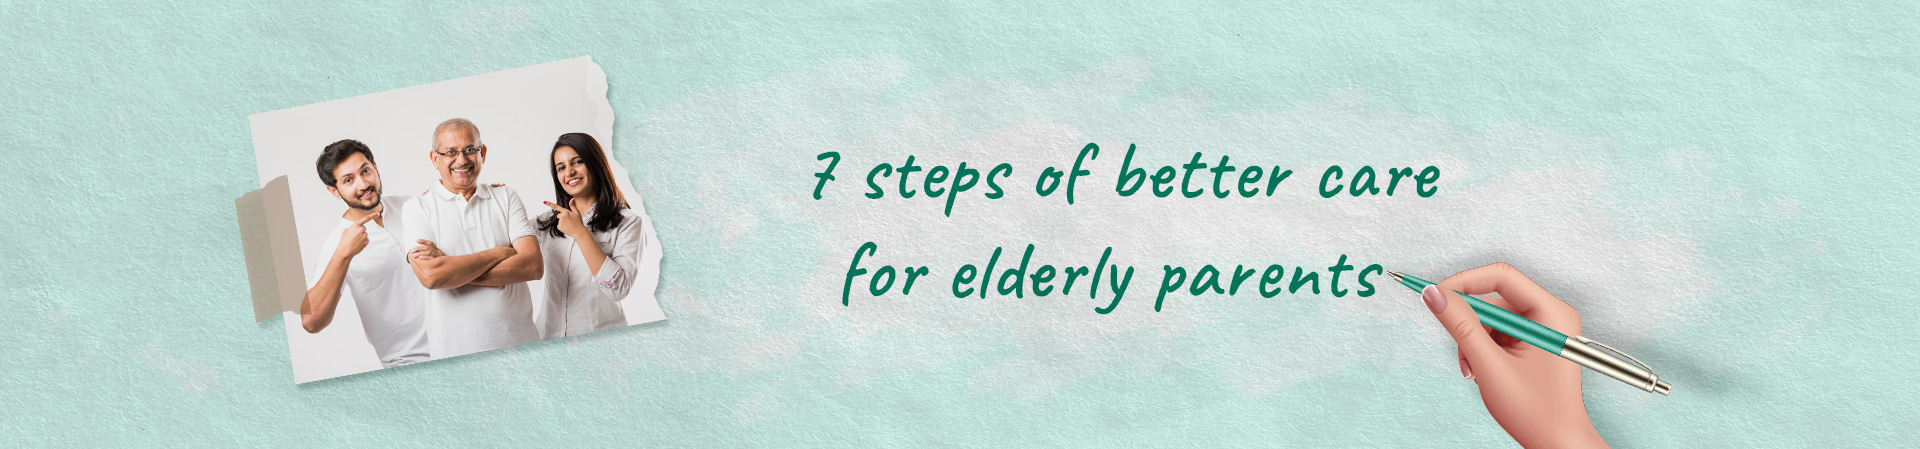 7 Things You Should Care When Your Elderly Parents Need Help to Live Happily in Kolkata